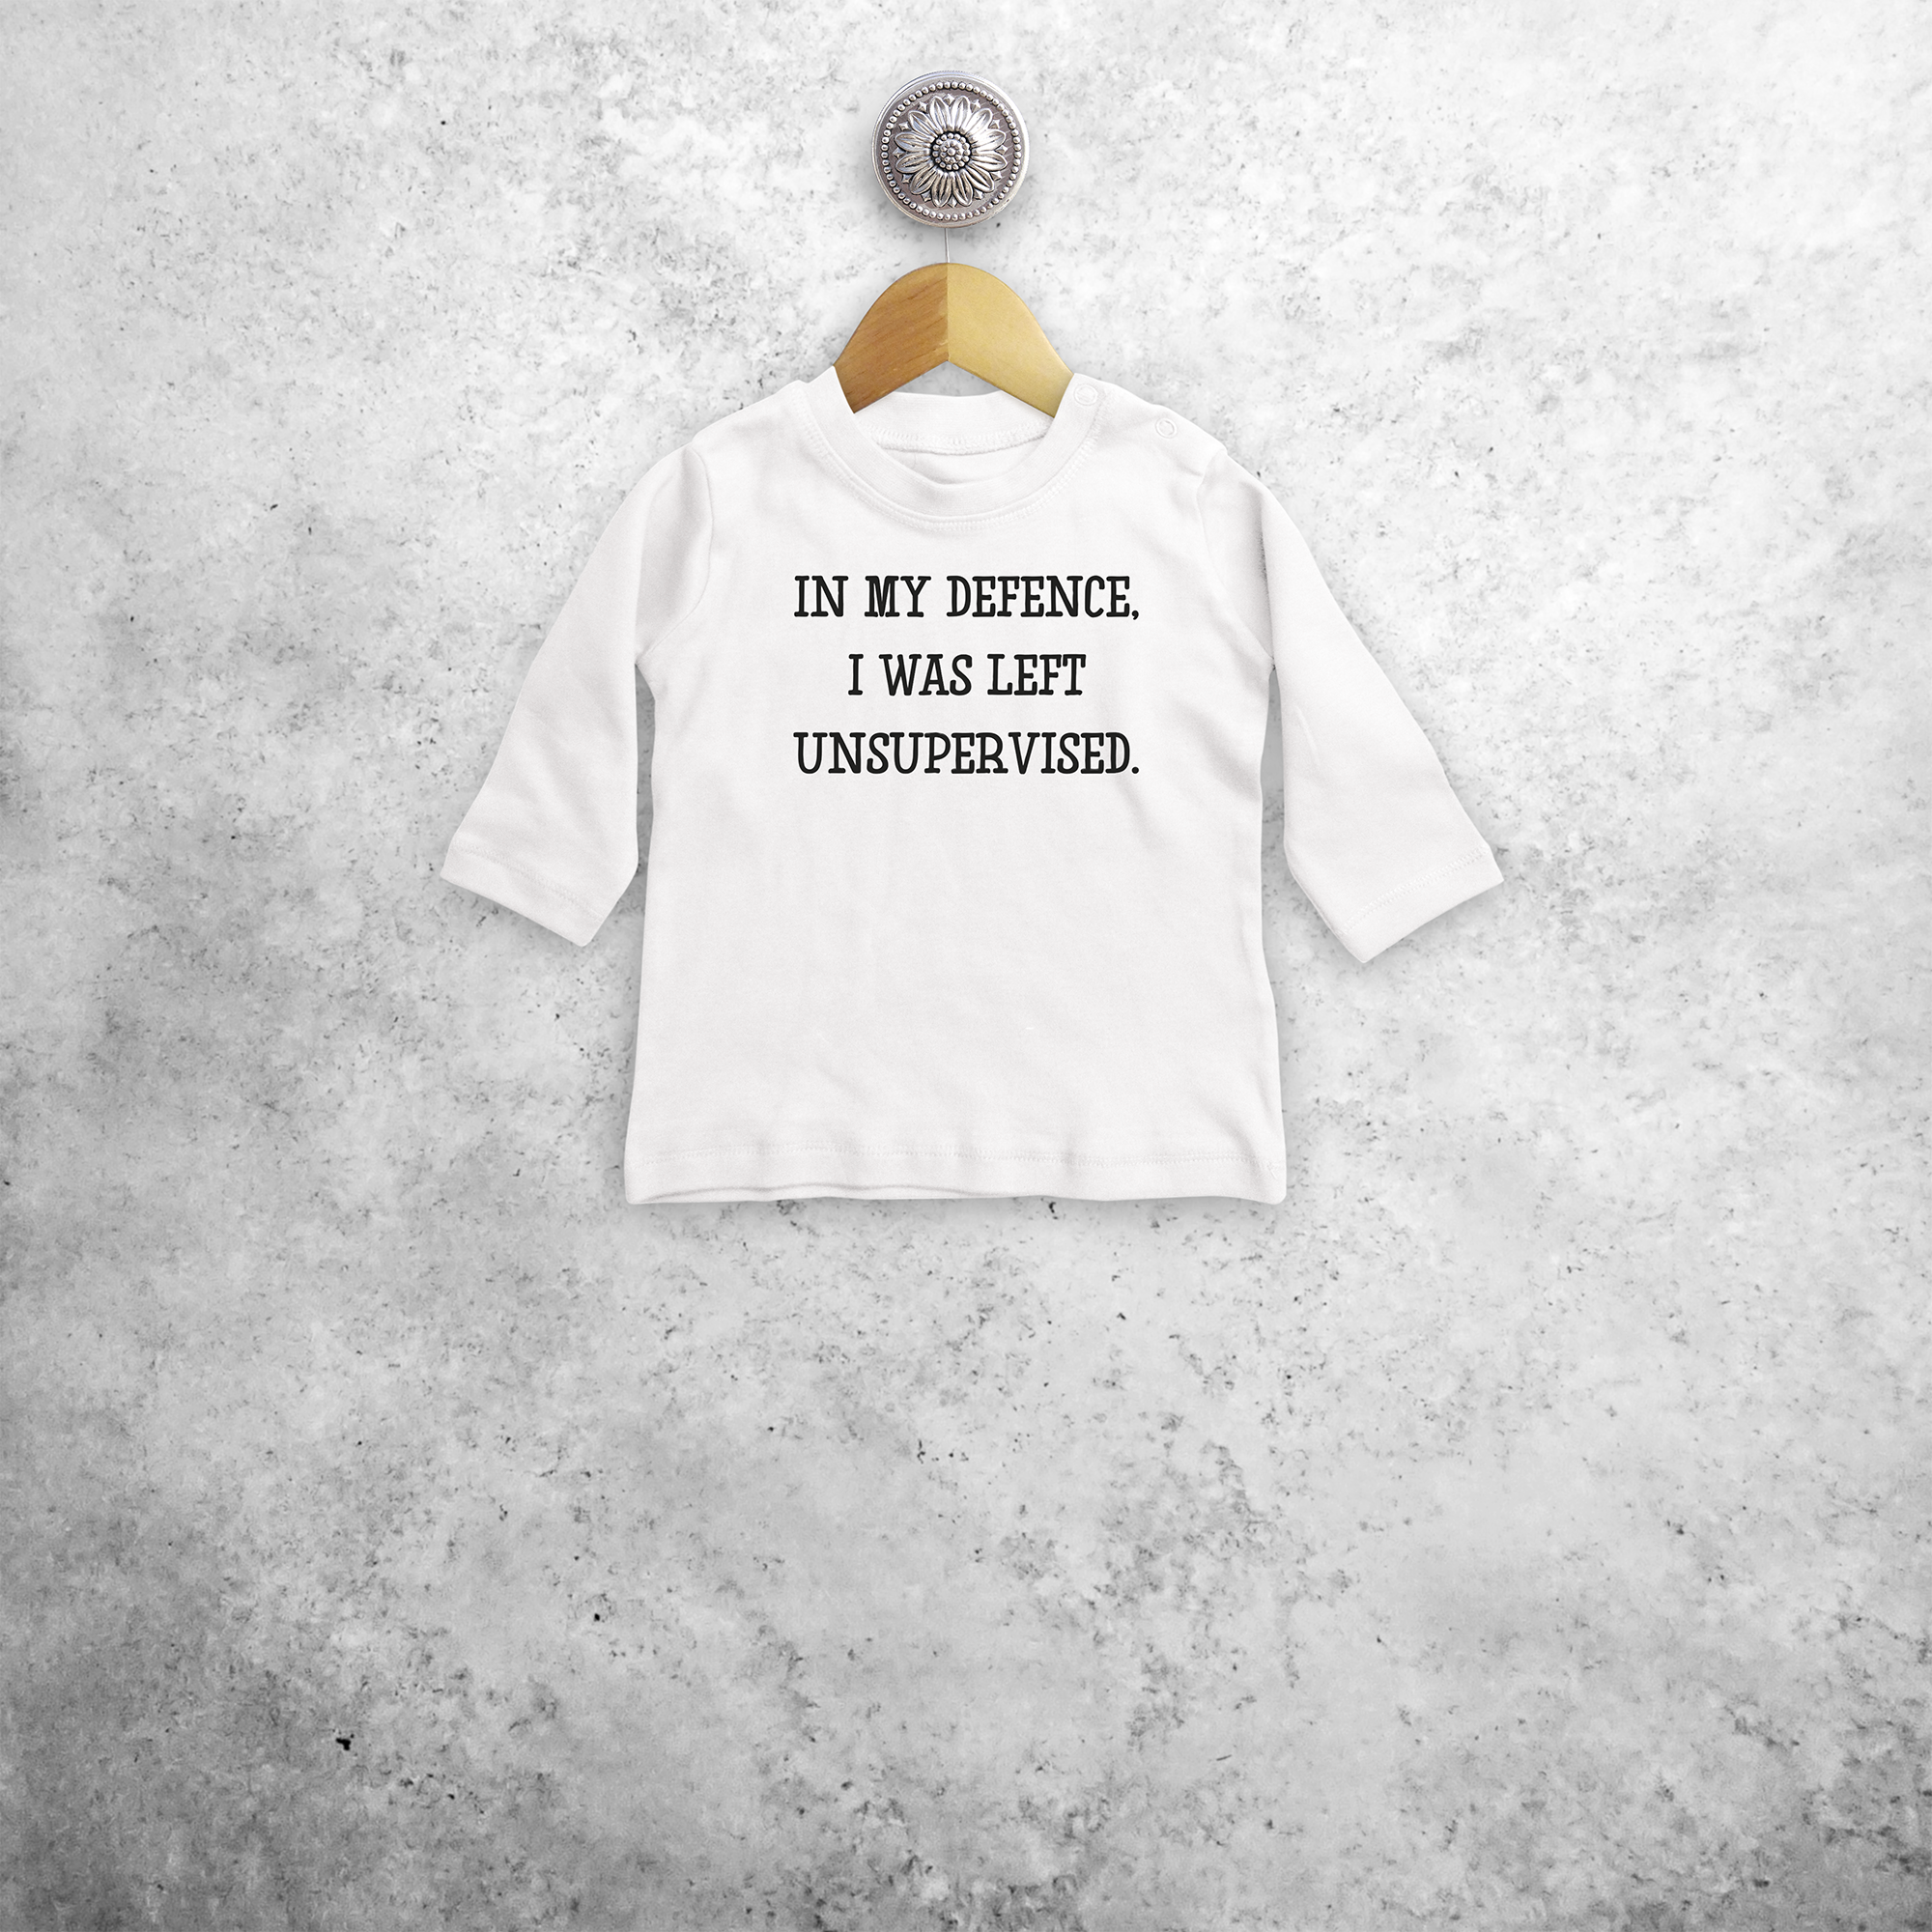 'In my defence, I was left unsupervised' baby longsleeve shirt